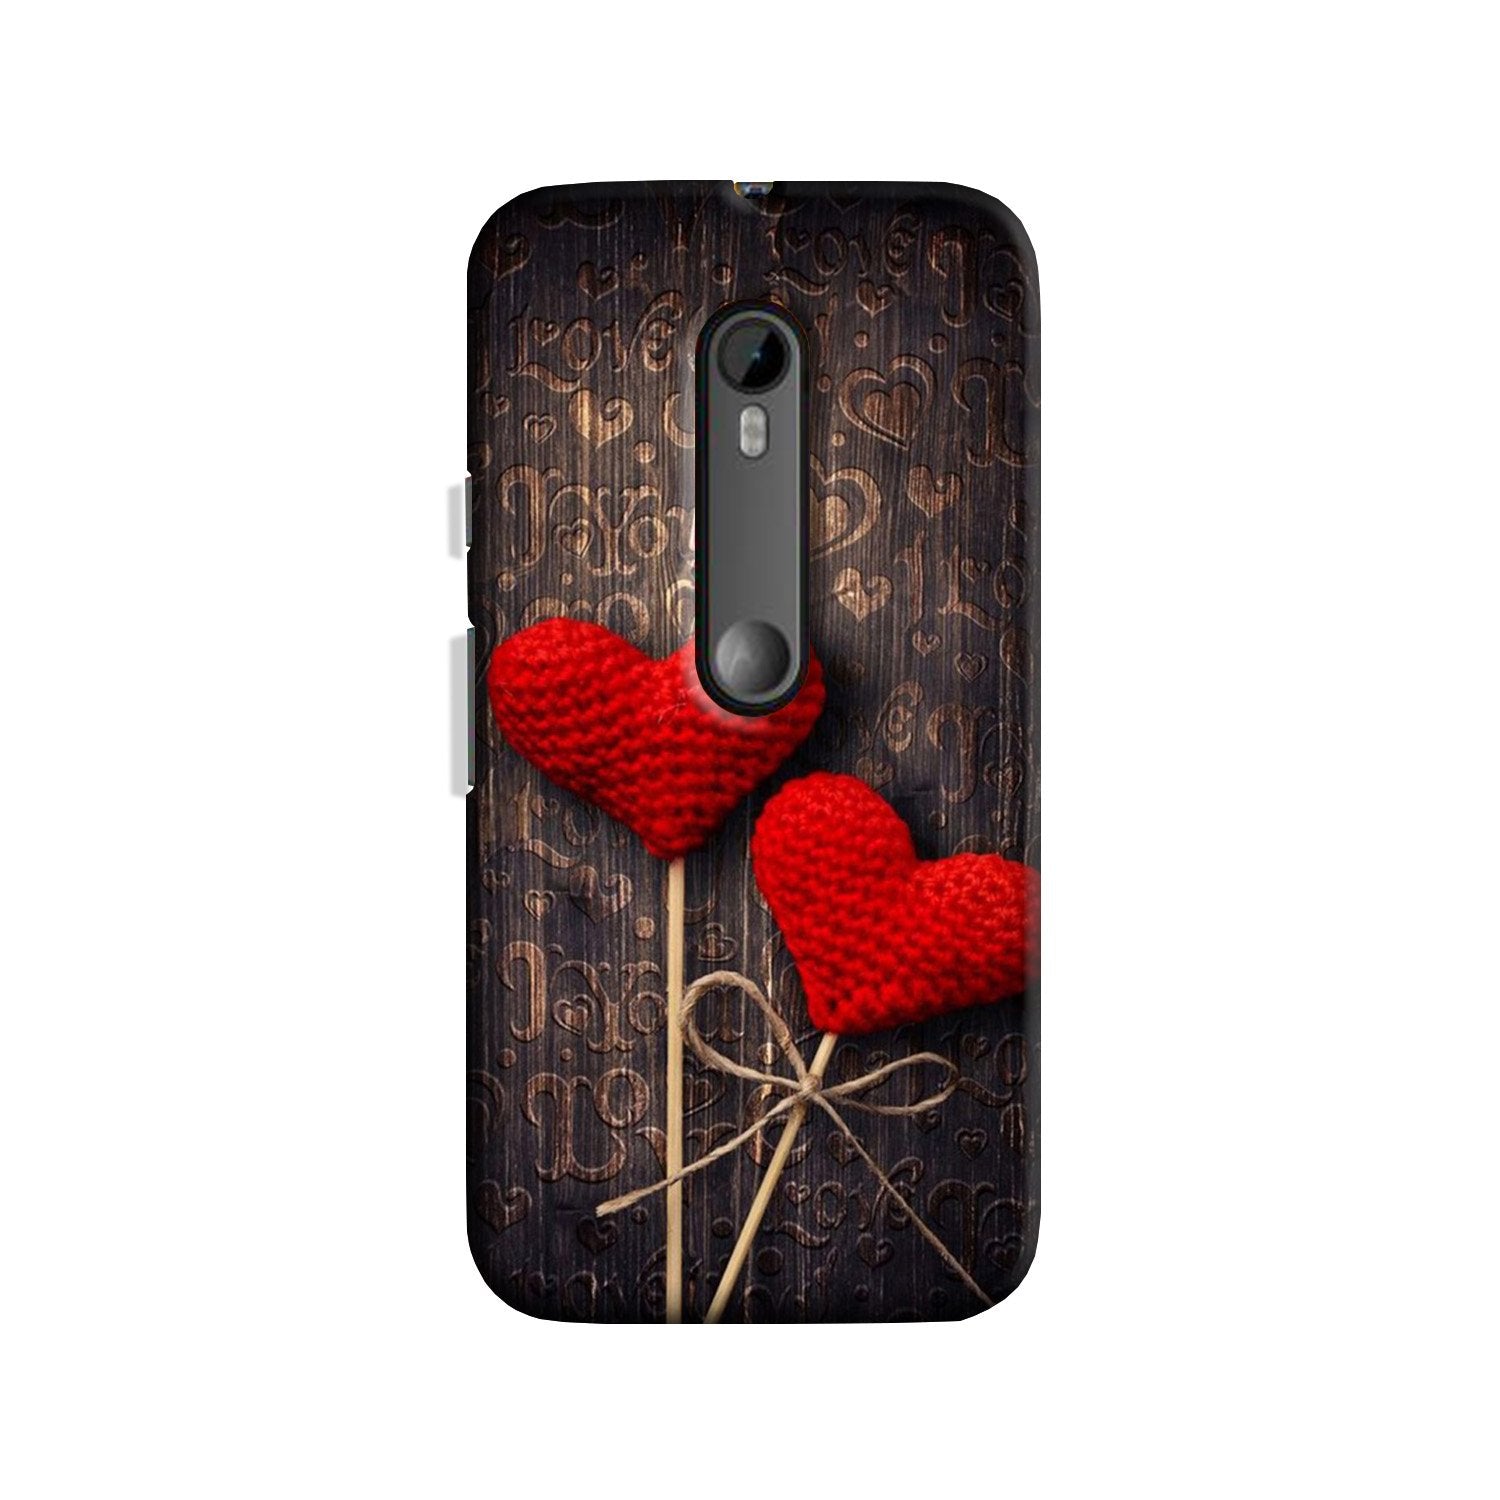 Red Hearts Case for Moto X Play